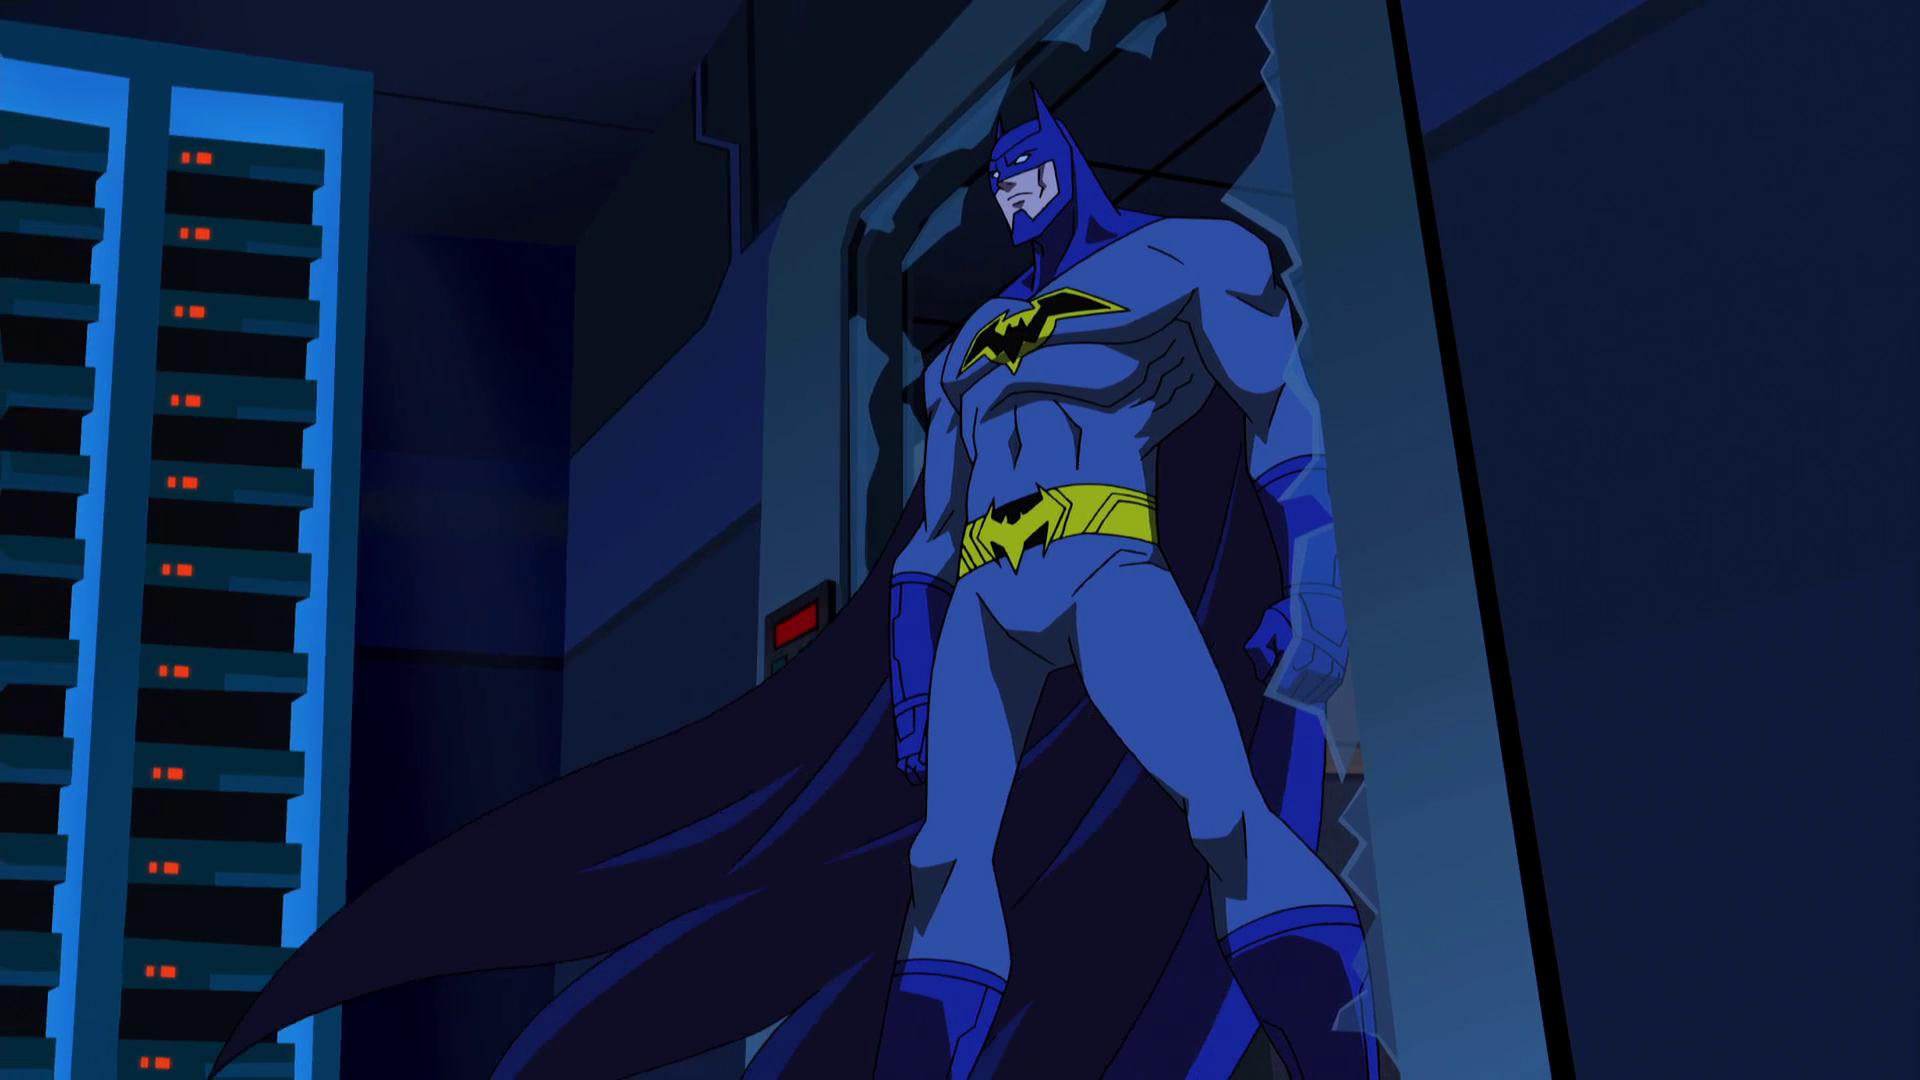 Batman: The Animated Series Phone Wallpaper - Mobile Abyss